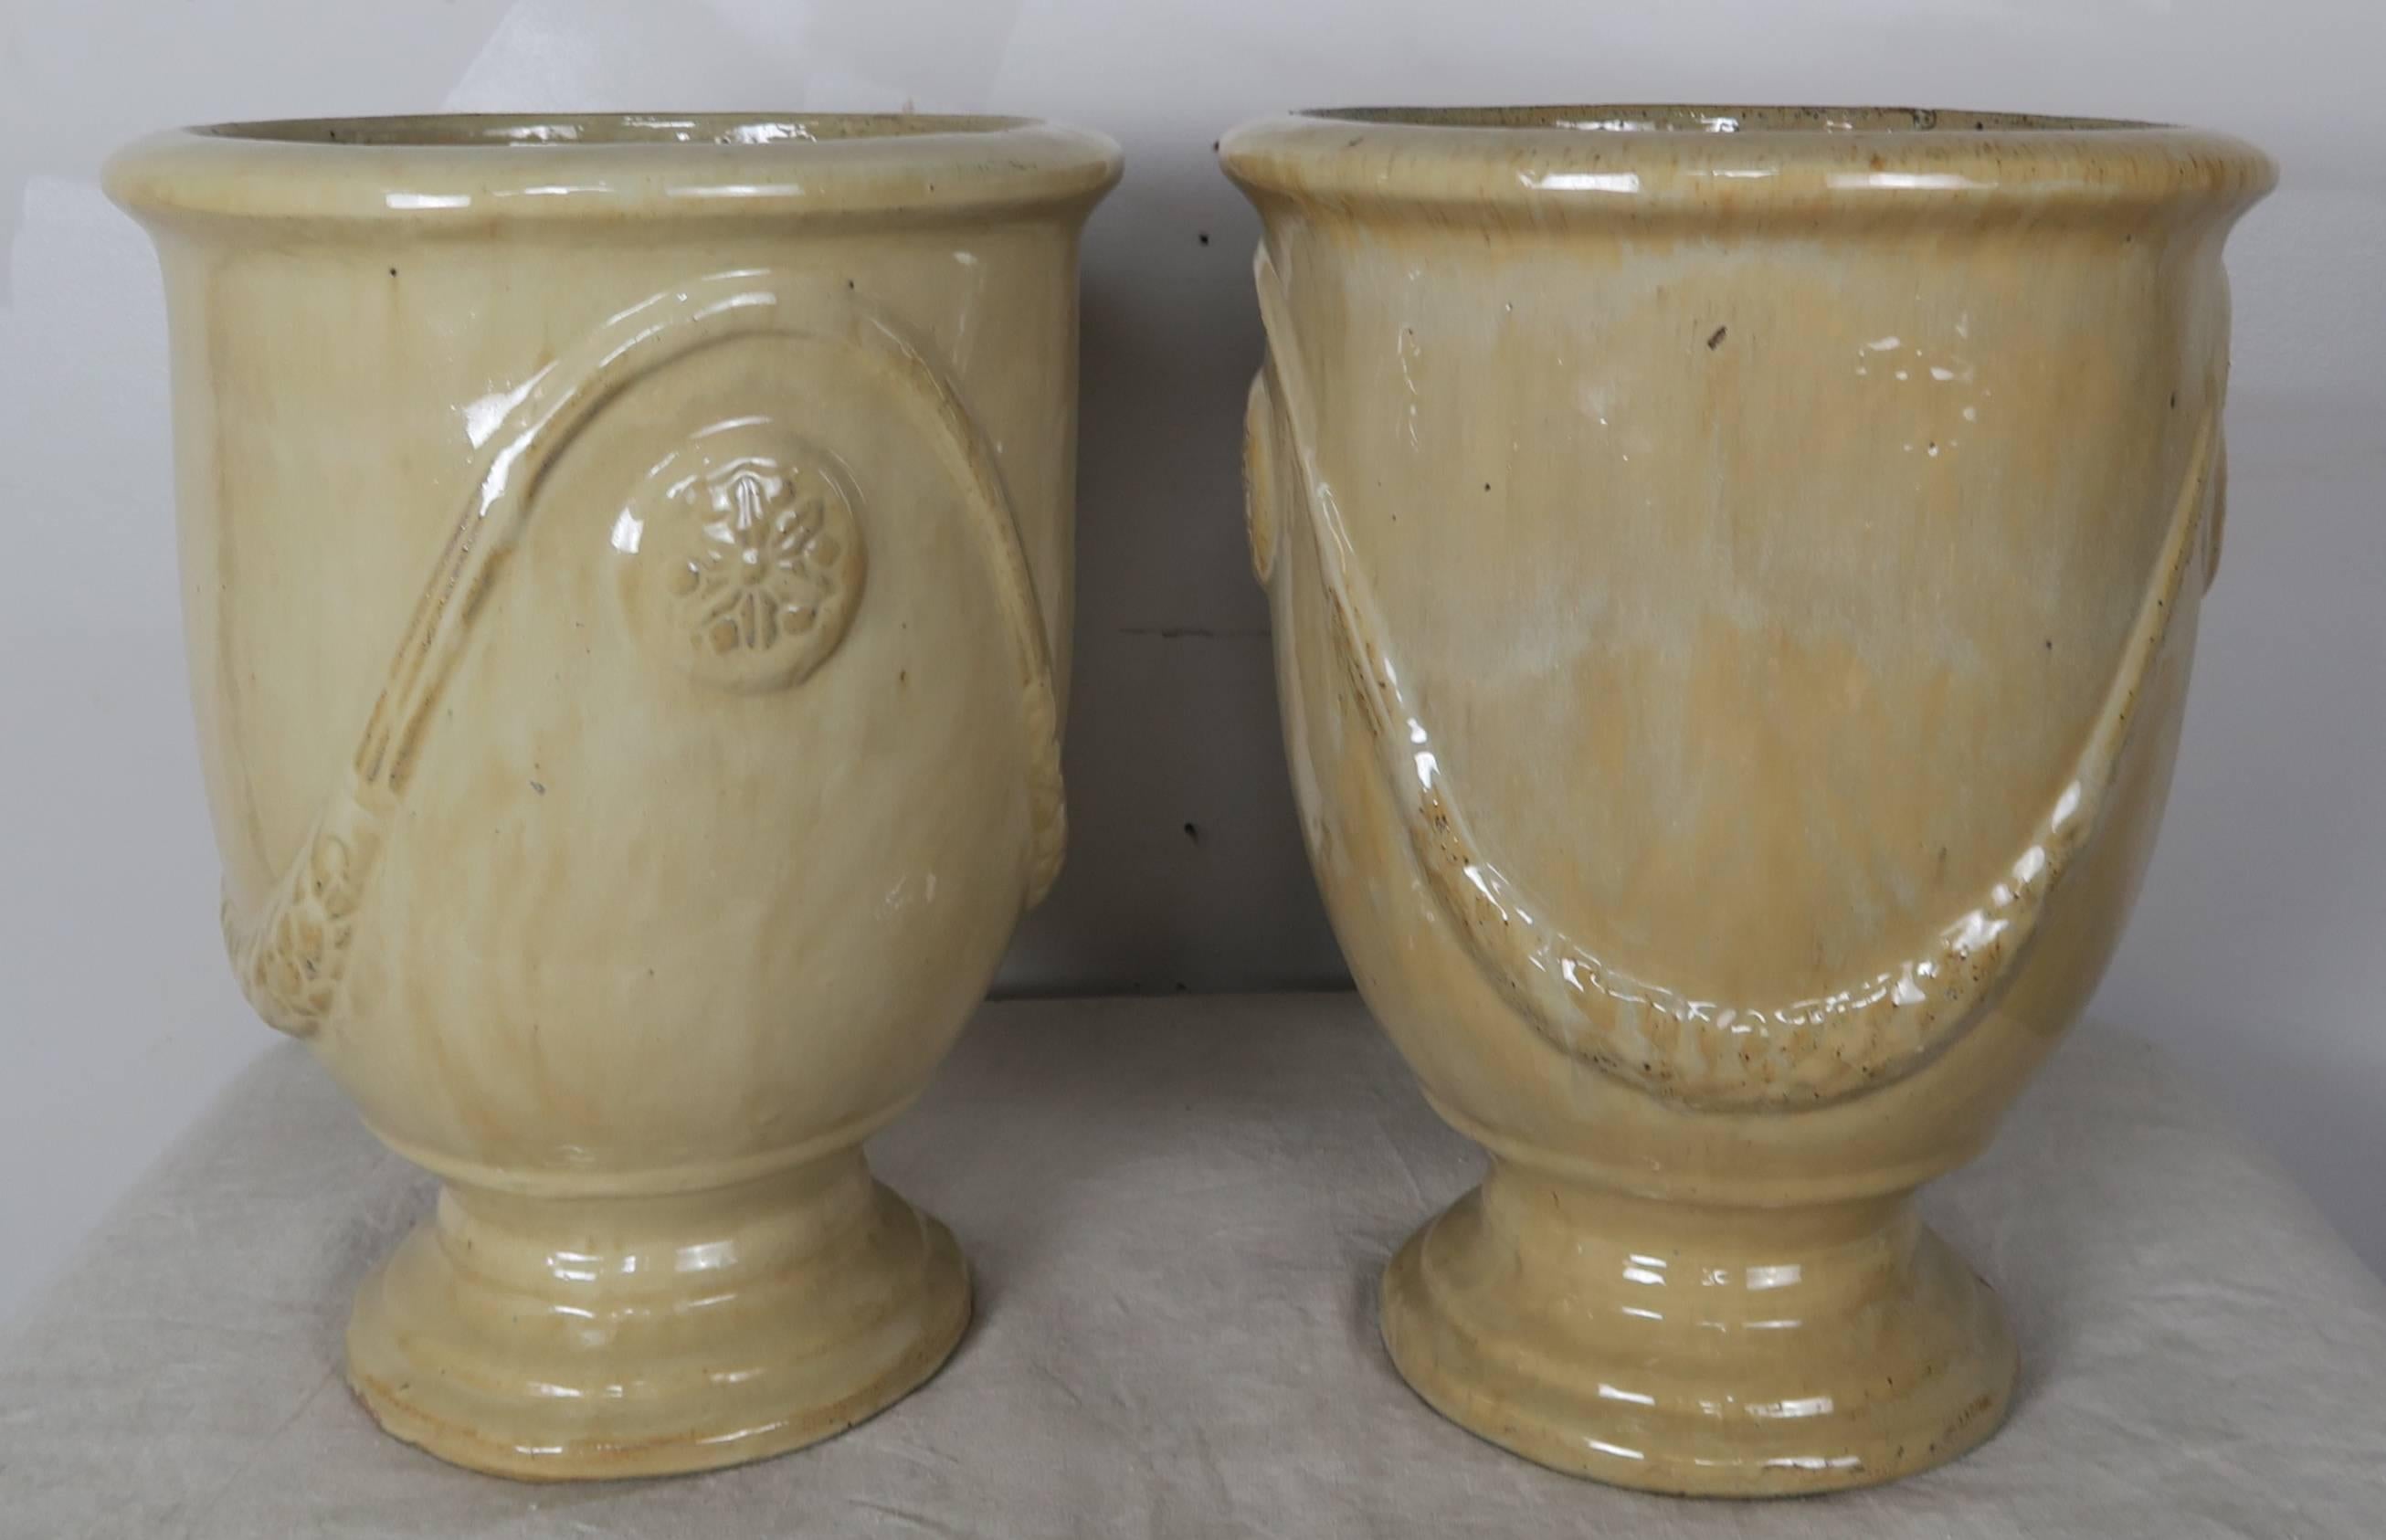 French Provincial Pair of French Terra Cotta Glazed Pots